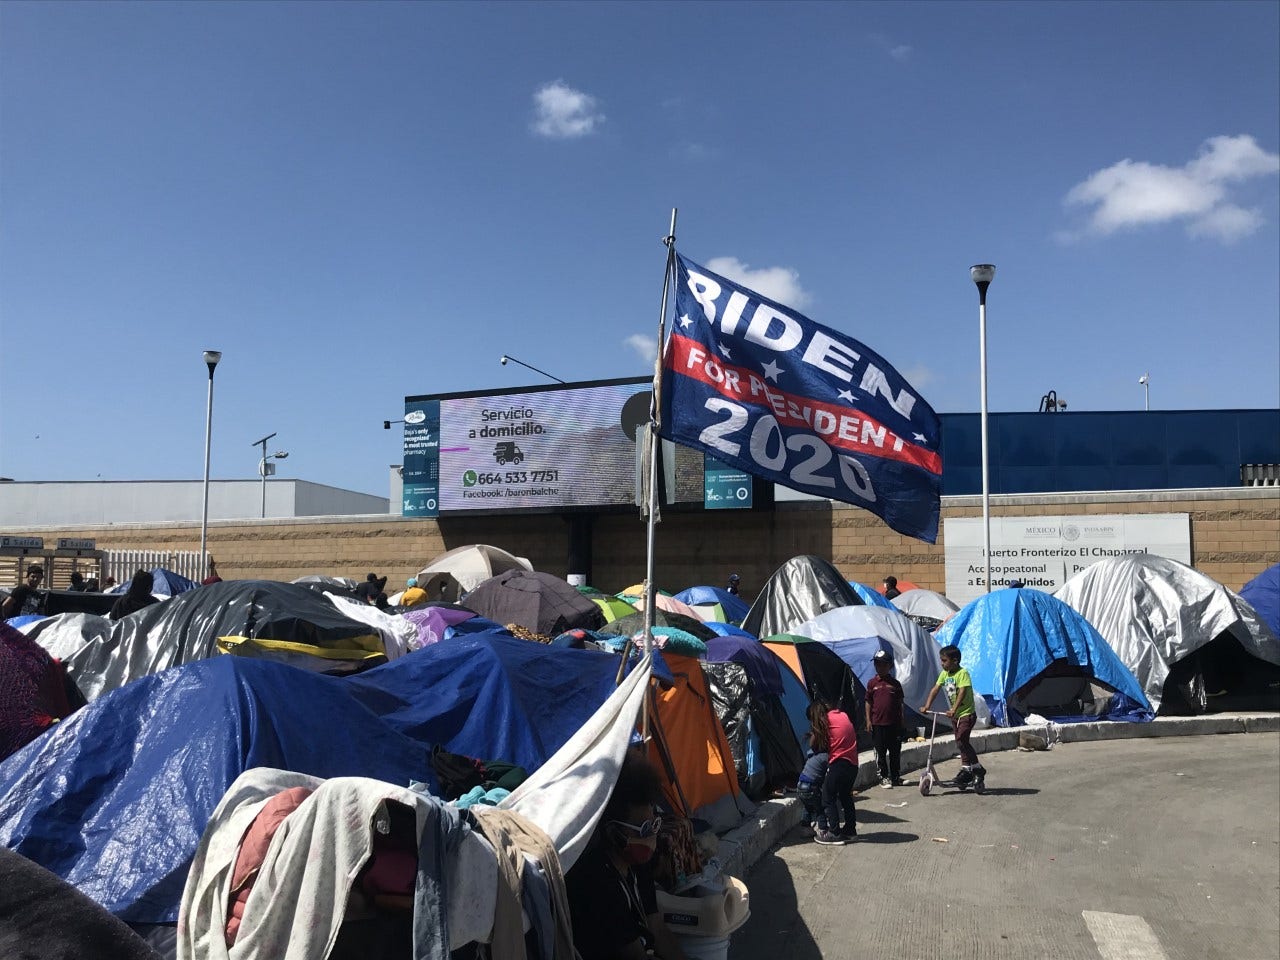 Border crisis: Biden now tells migrants 'Don't come' but had a different message in a 2019 debate